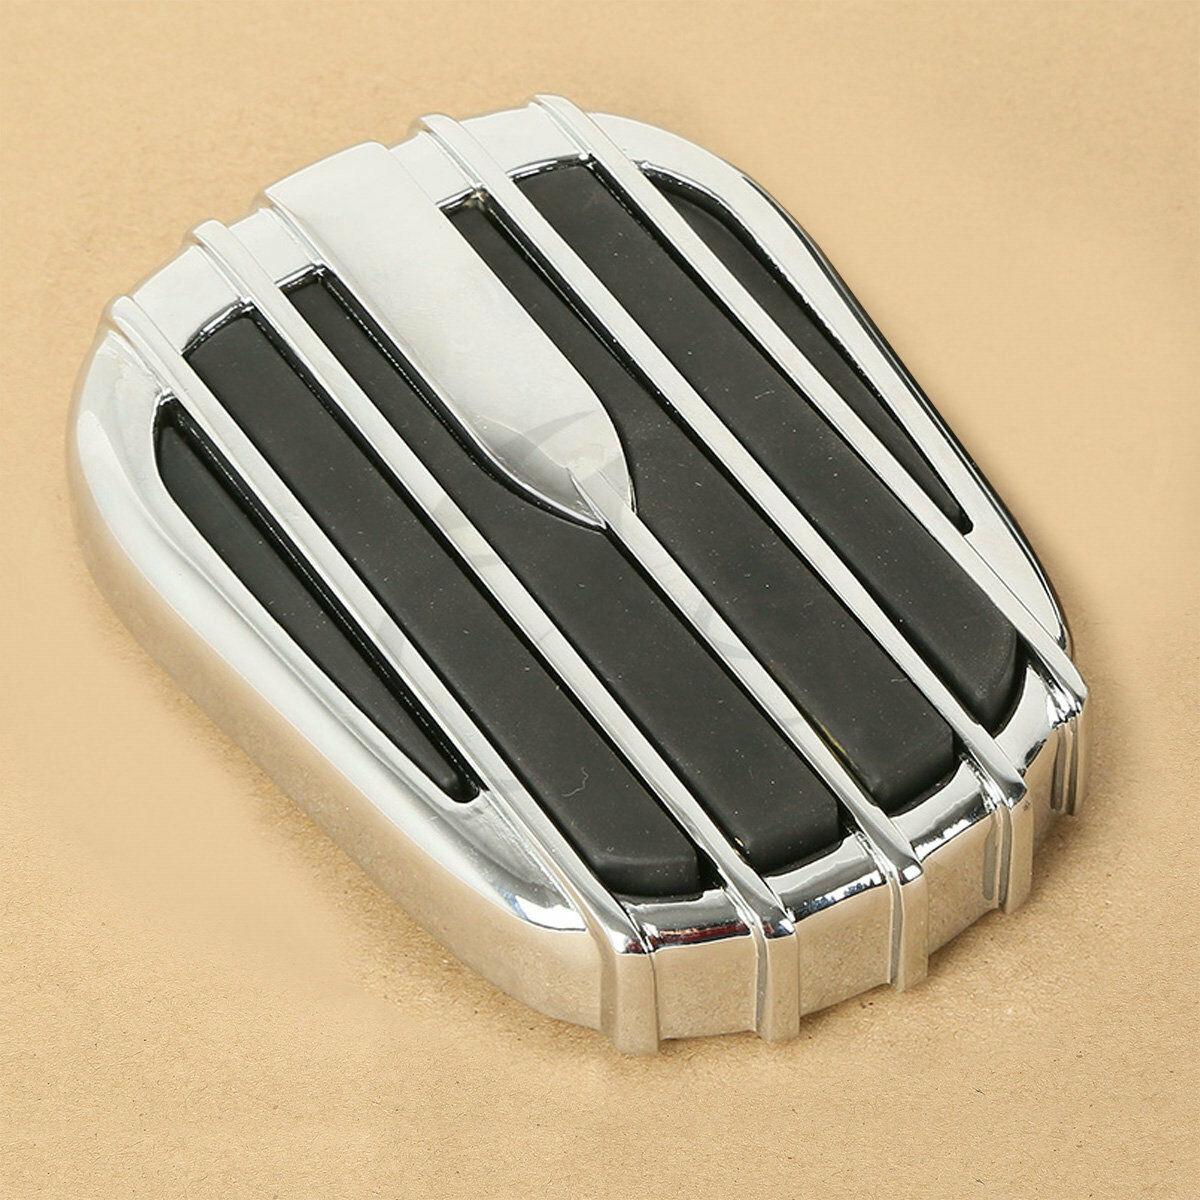 Brake Pedal Pad Cover Fit For Harley Touring Dyna Electra Street Glide Road King - Moto Life Products